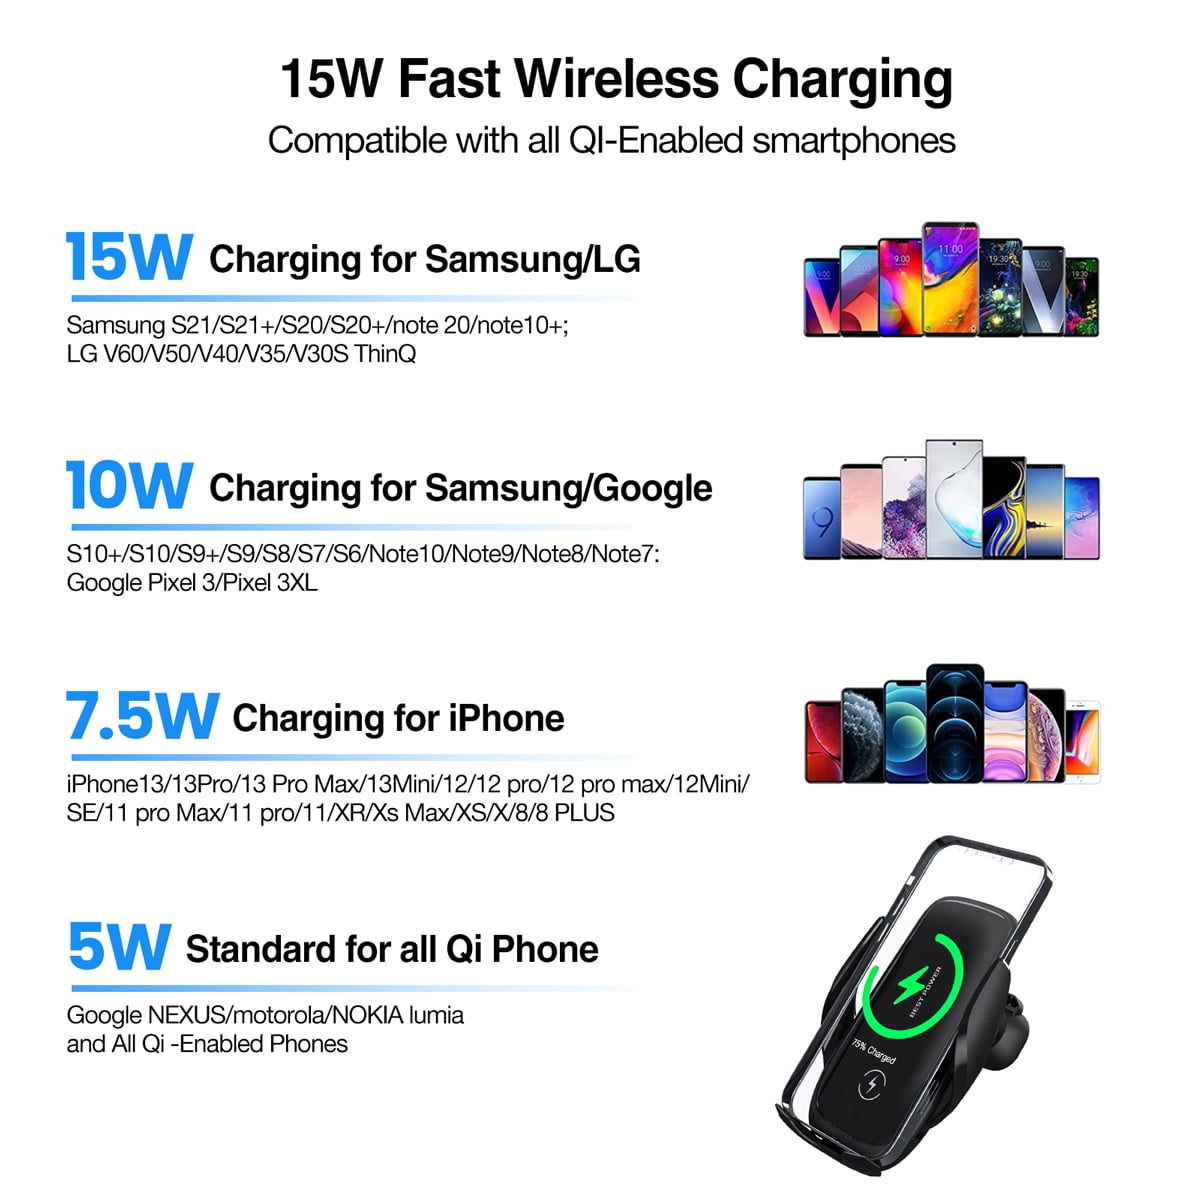 Samsung Galaxy Series Wireless Car Charger Mount,15W/10W/7.5W Fast Charging Auto-Clamping Car Phone Holder Mount,Air Vent Car Phone Mount for iPhone 13/13 Pro/12 Pro Max/12 pro/12/11/10/8 Series etc 